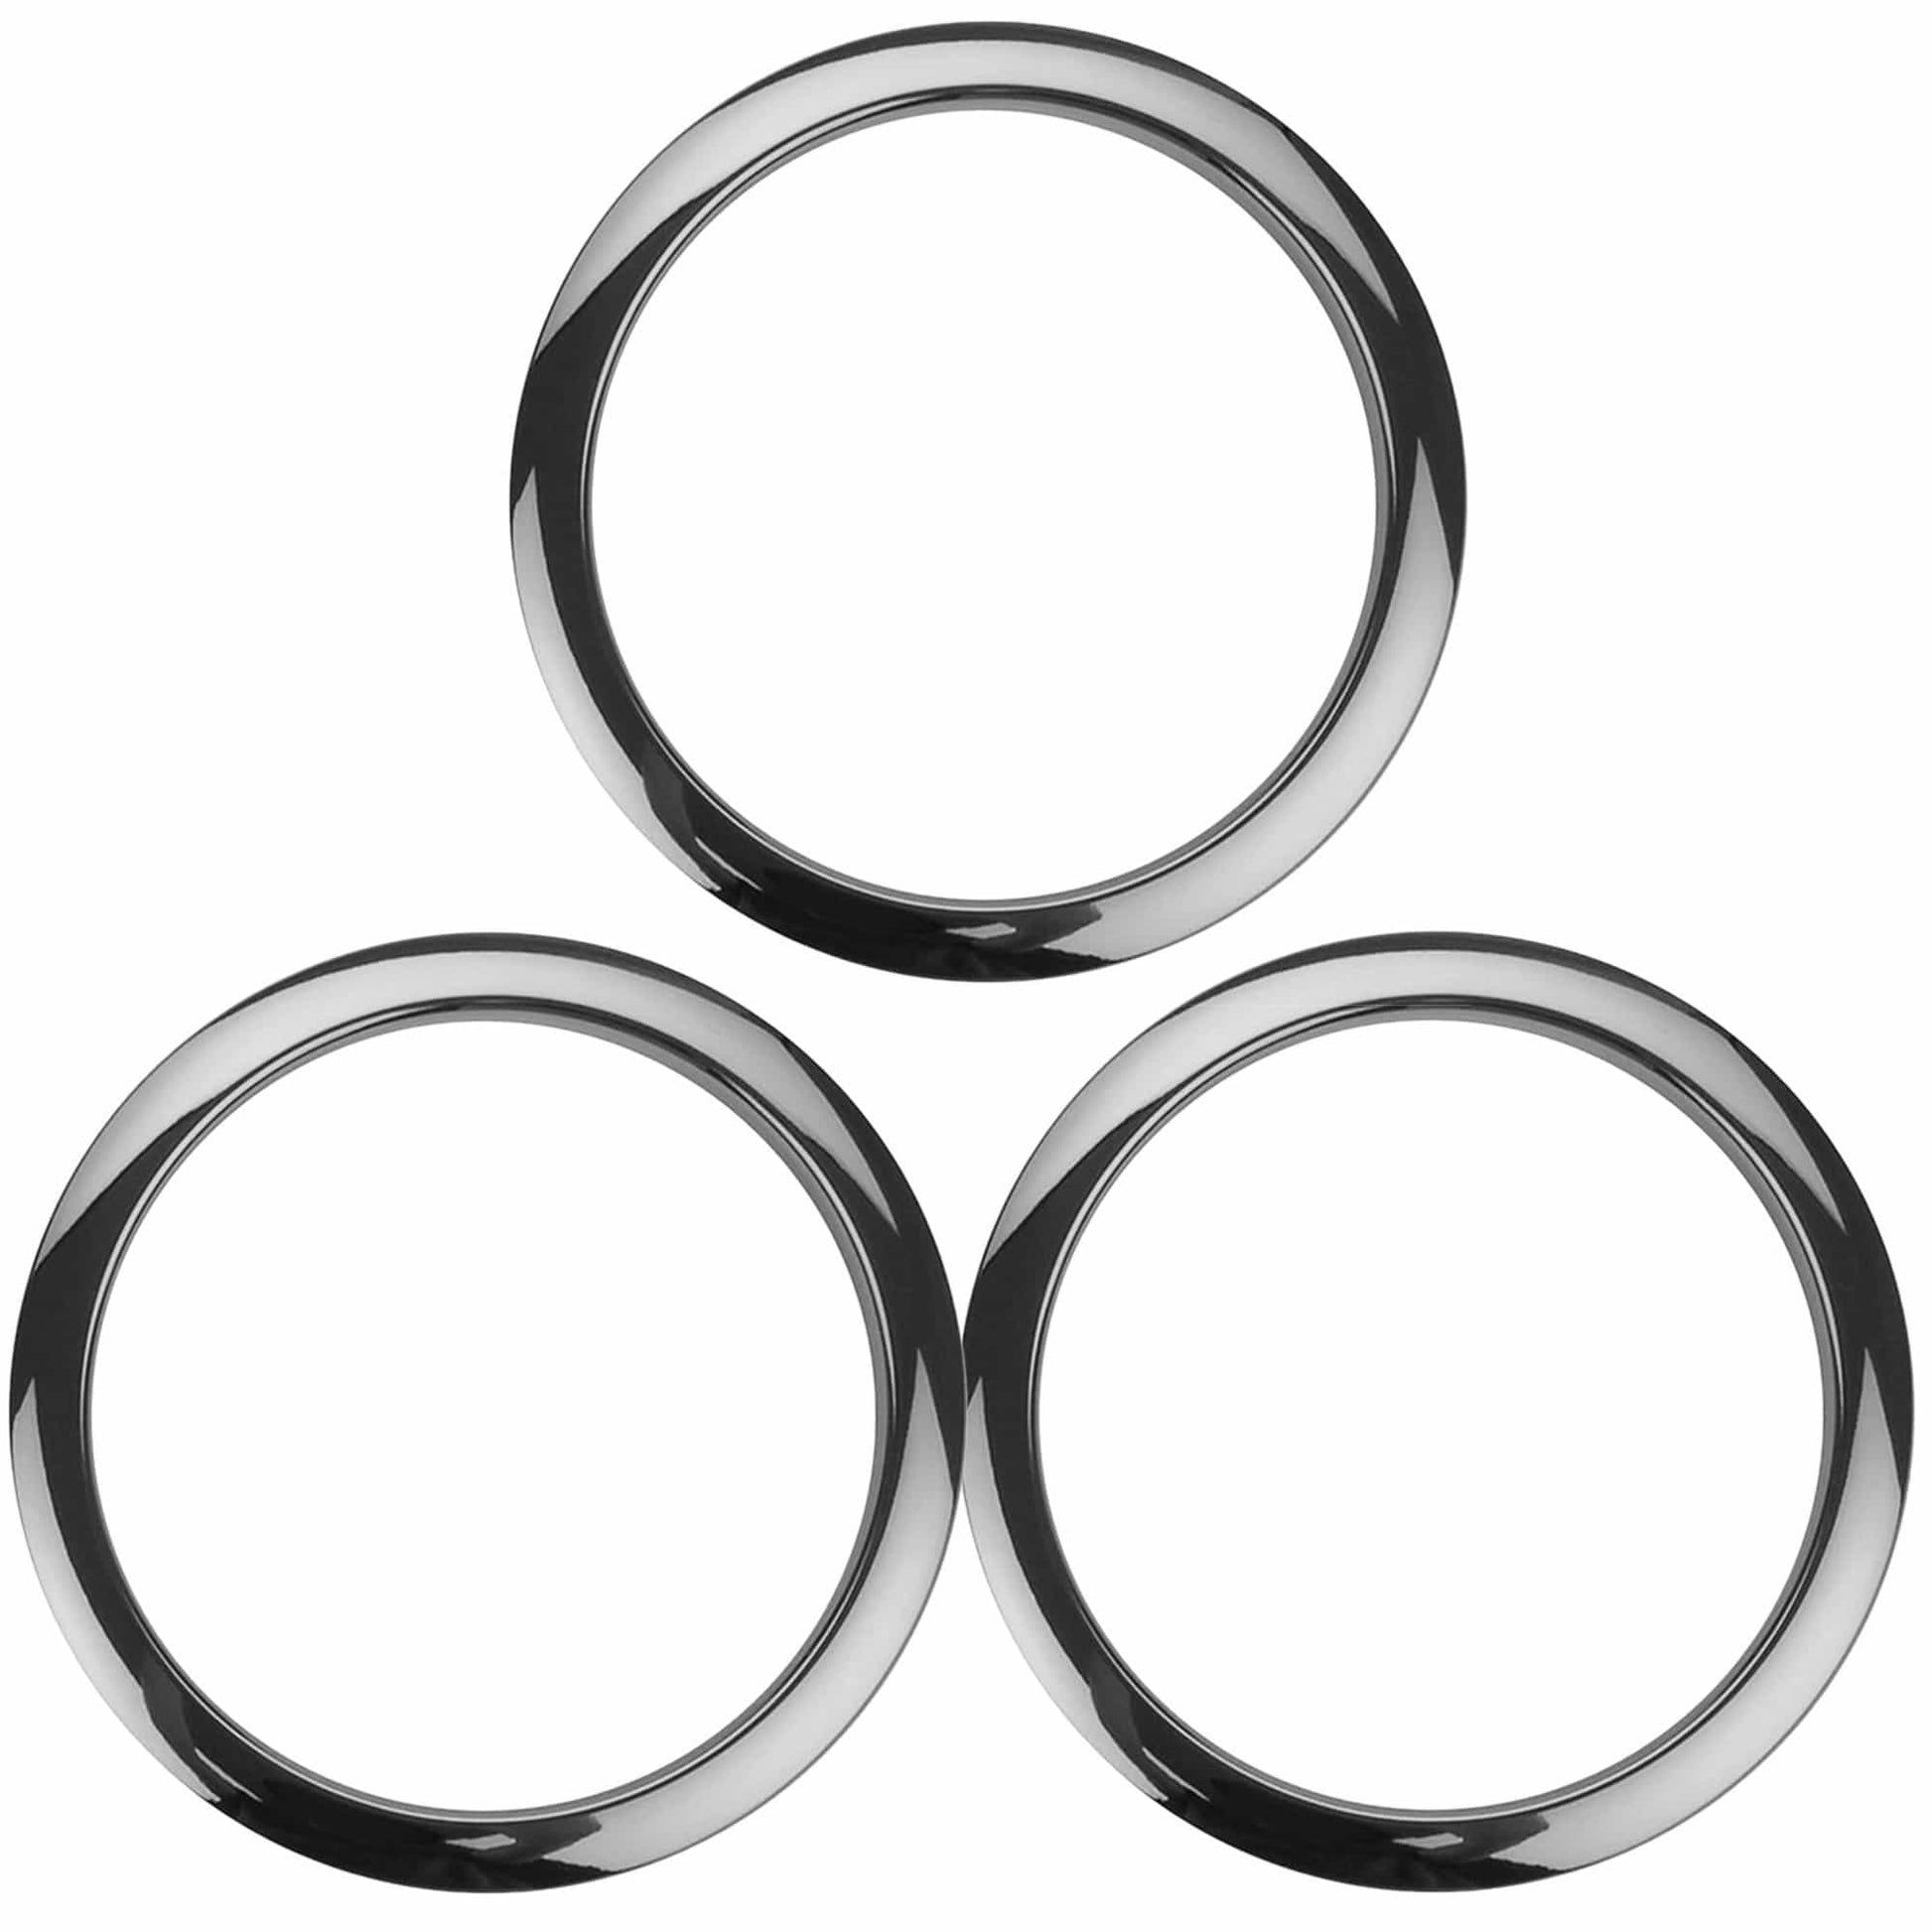 Bass Drum O's 5" Bass Drum Head Reinforcement Ring Chrome (3 Pack Bundle) Drums and Percussion / Parts and Accessories / Drum Parts